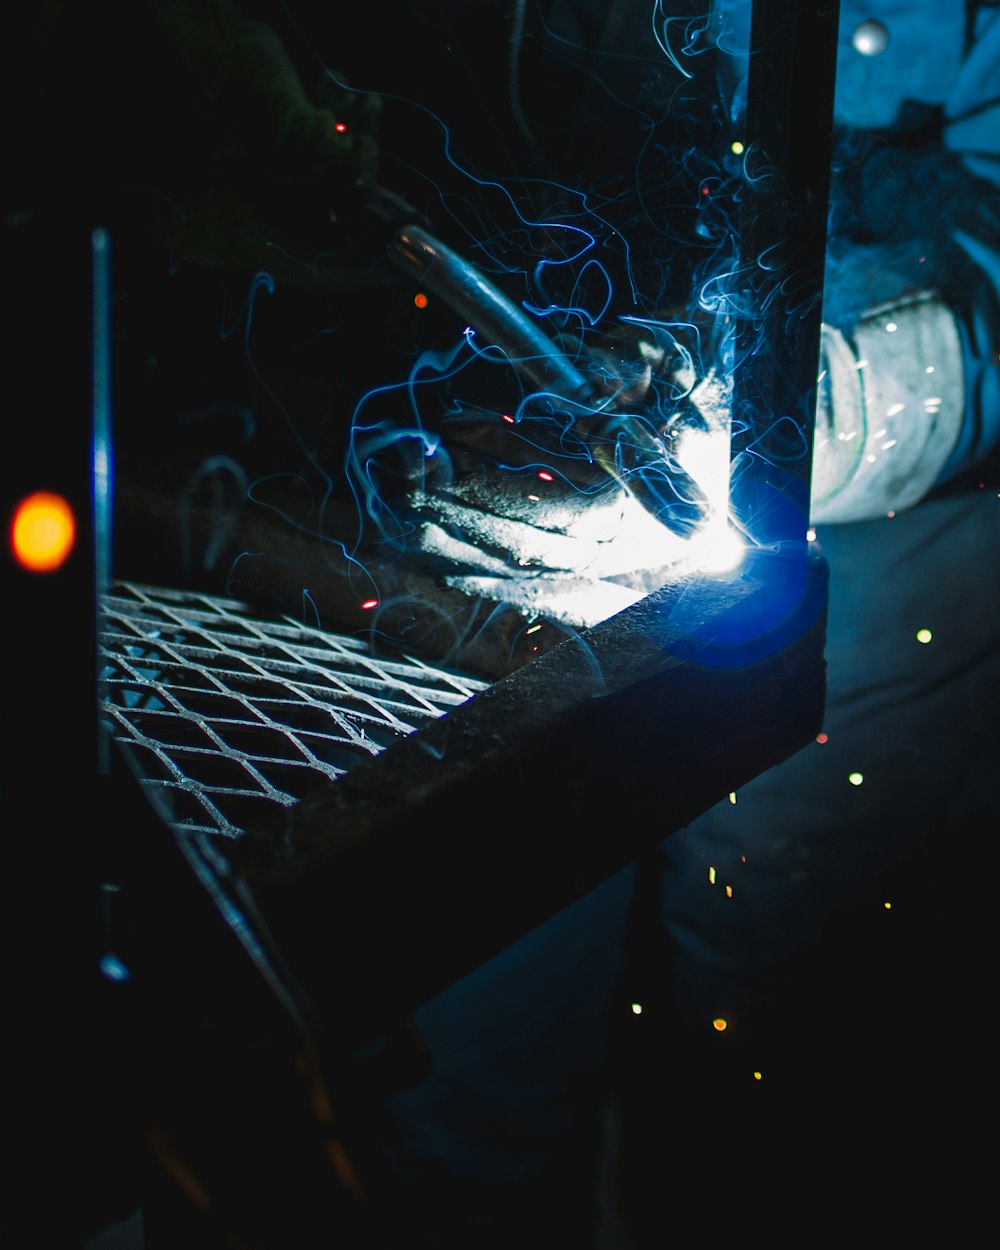 person holding a welding equipment